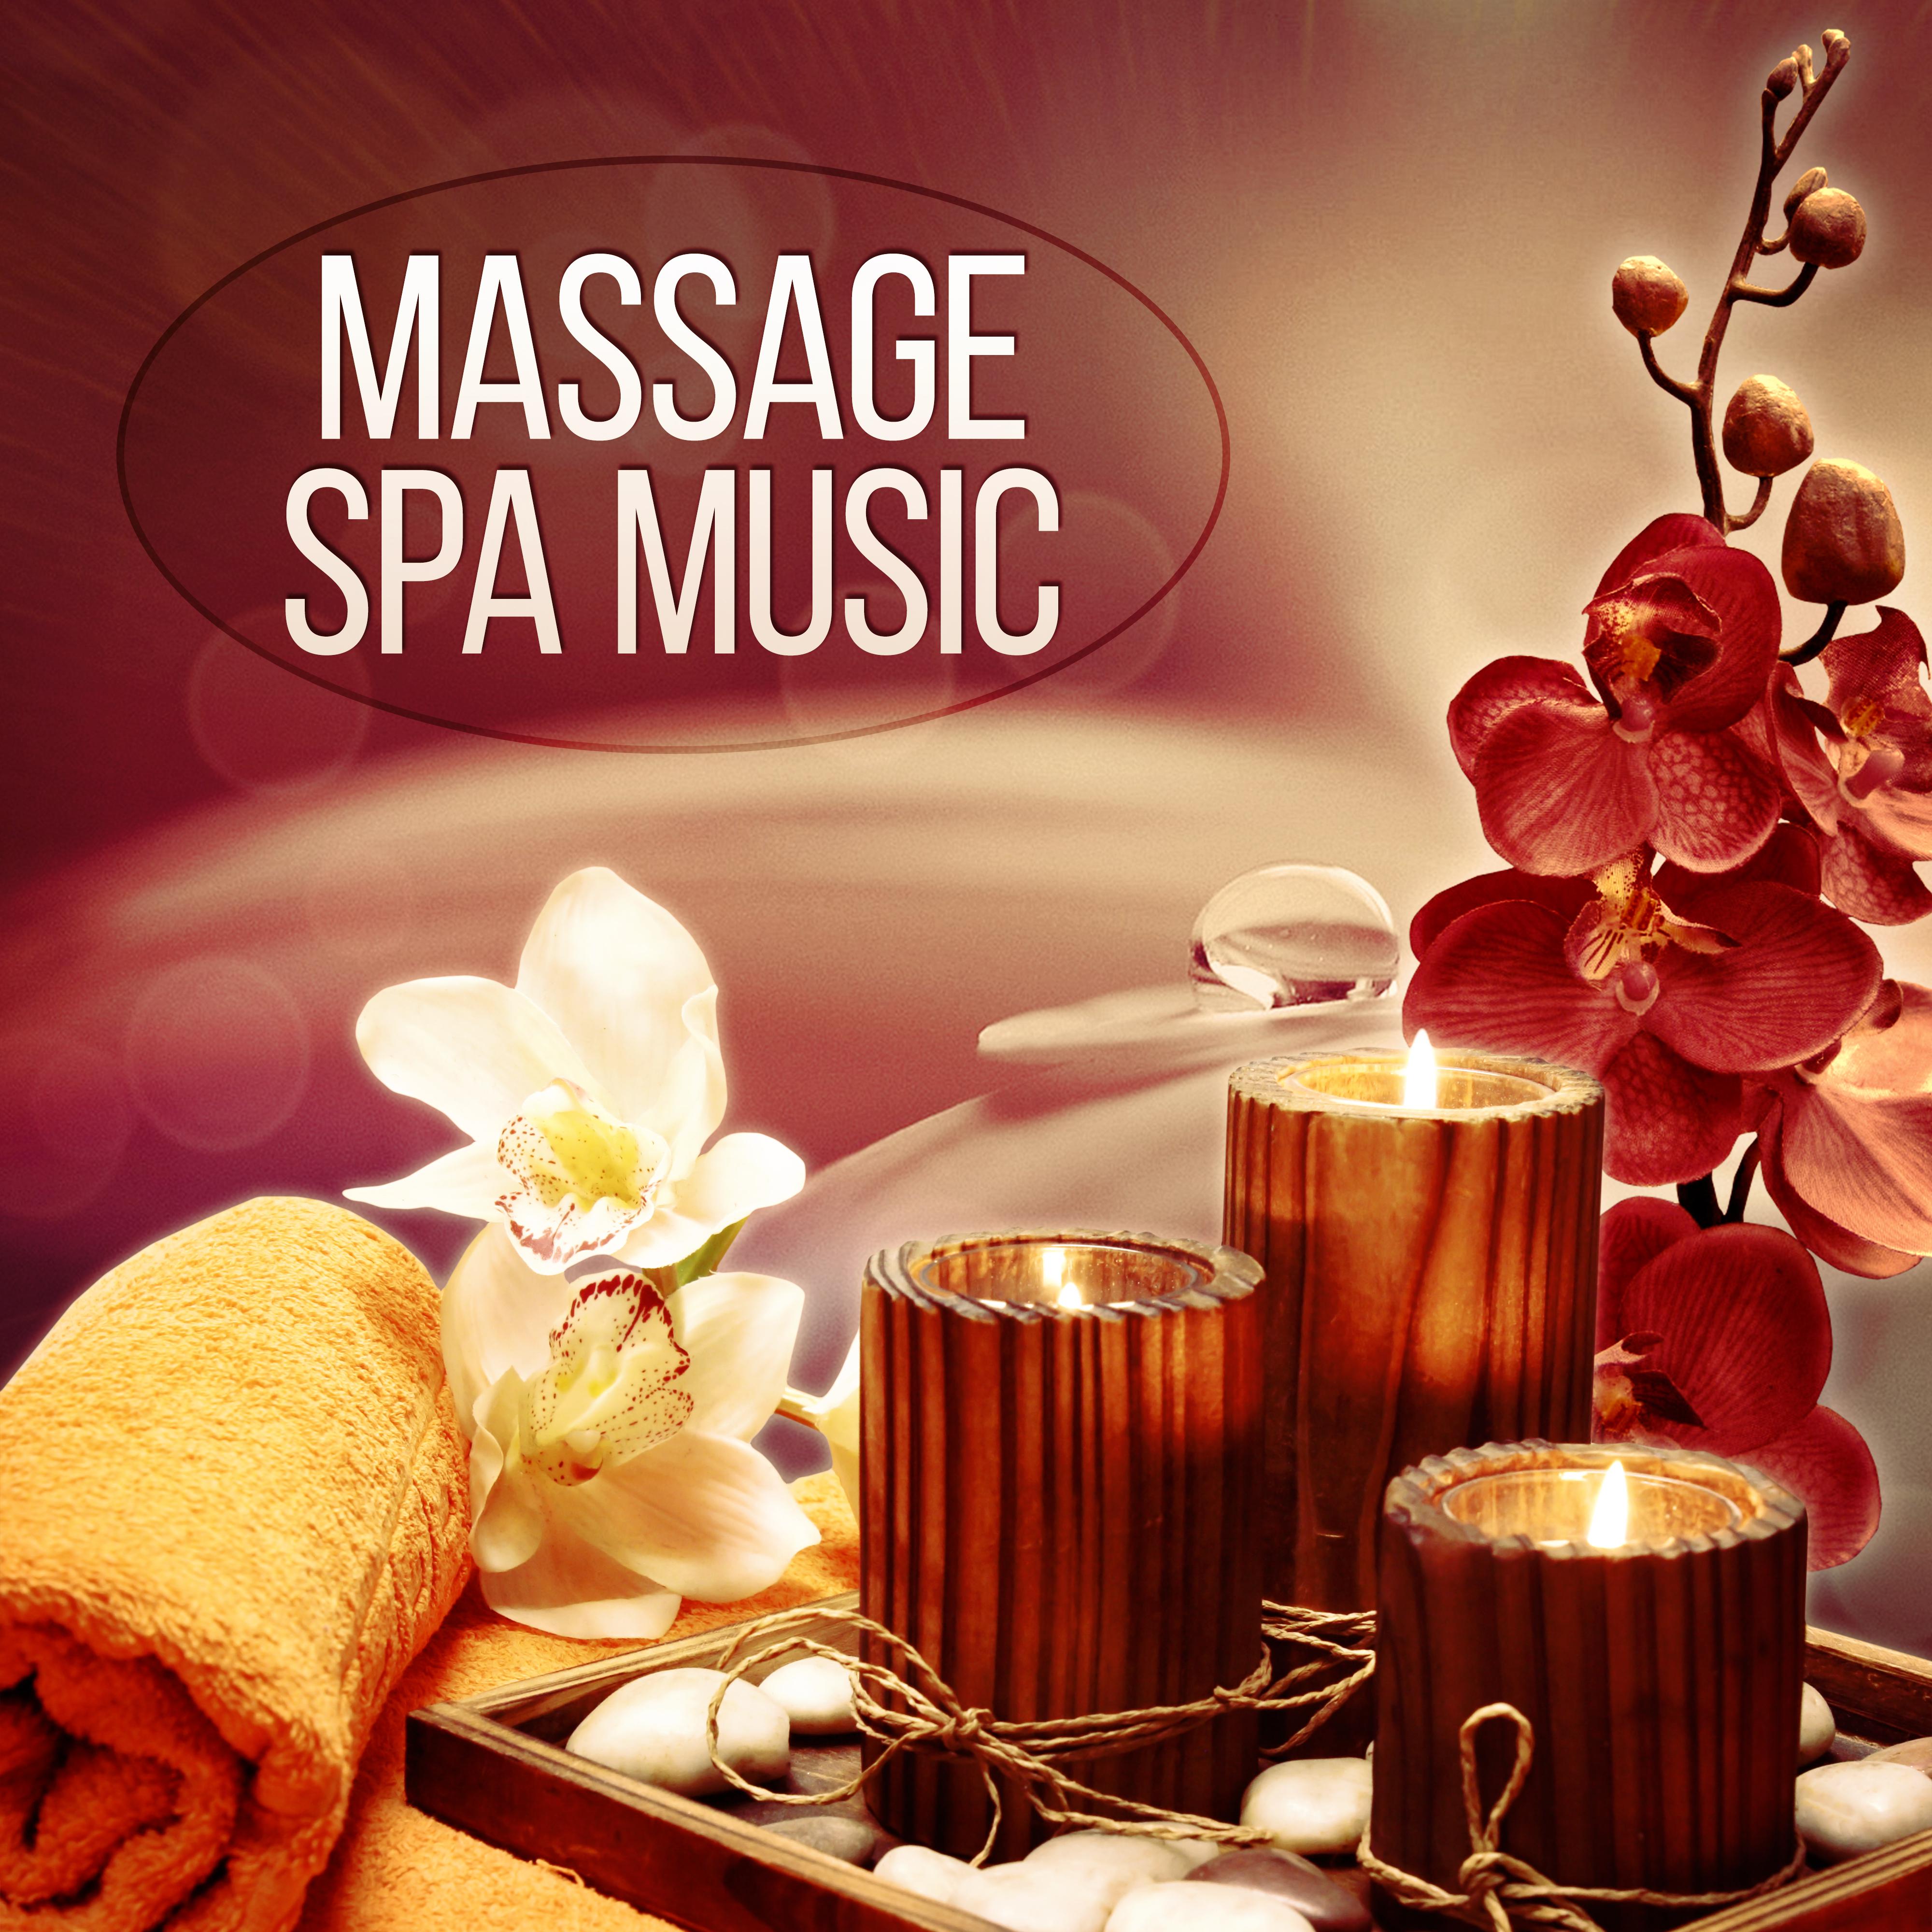 Massage Spa Music - Music and Pure Nature Sounds for Stress Relief, Harmony of Senses, Relaxing Ambient, Spa the Wellness Center, Sensual Massage Music